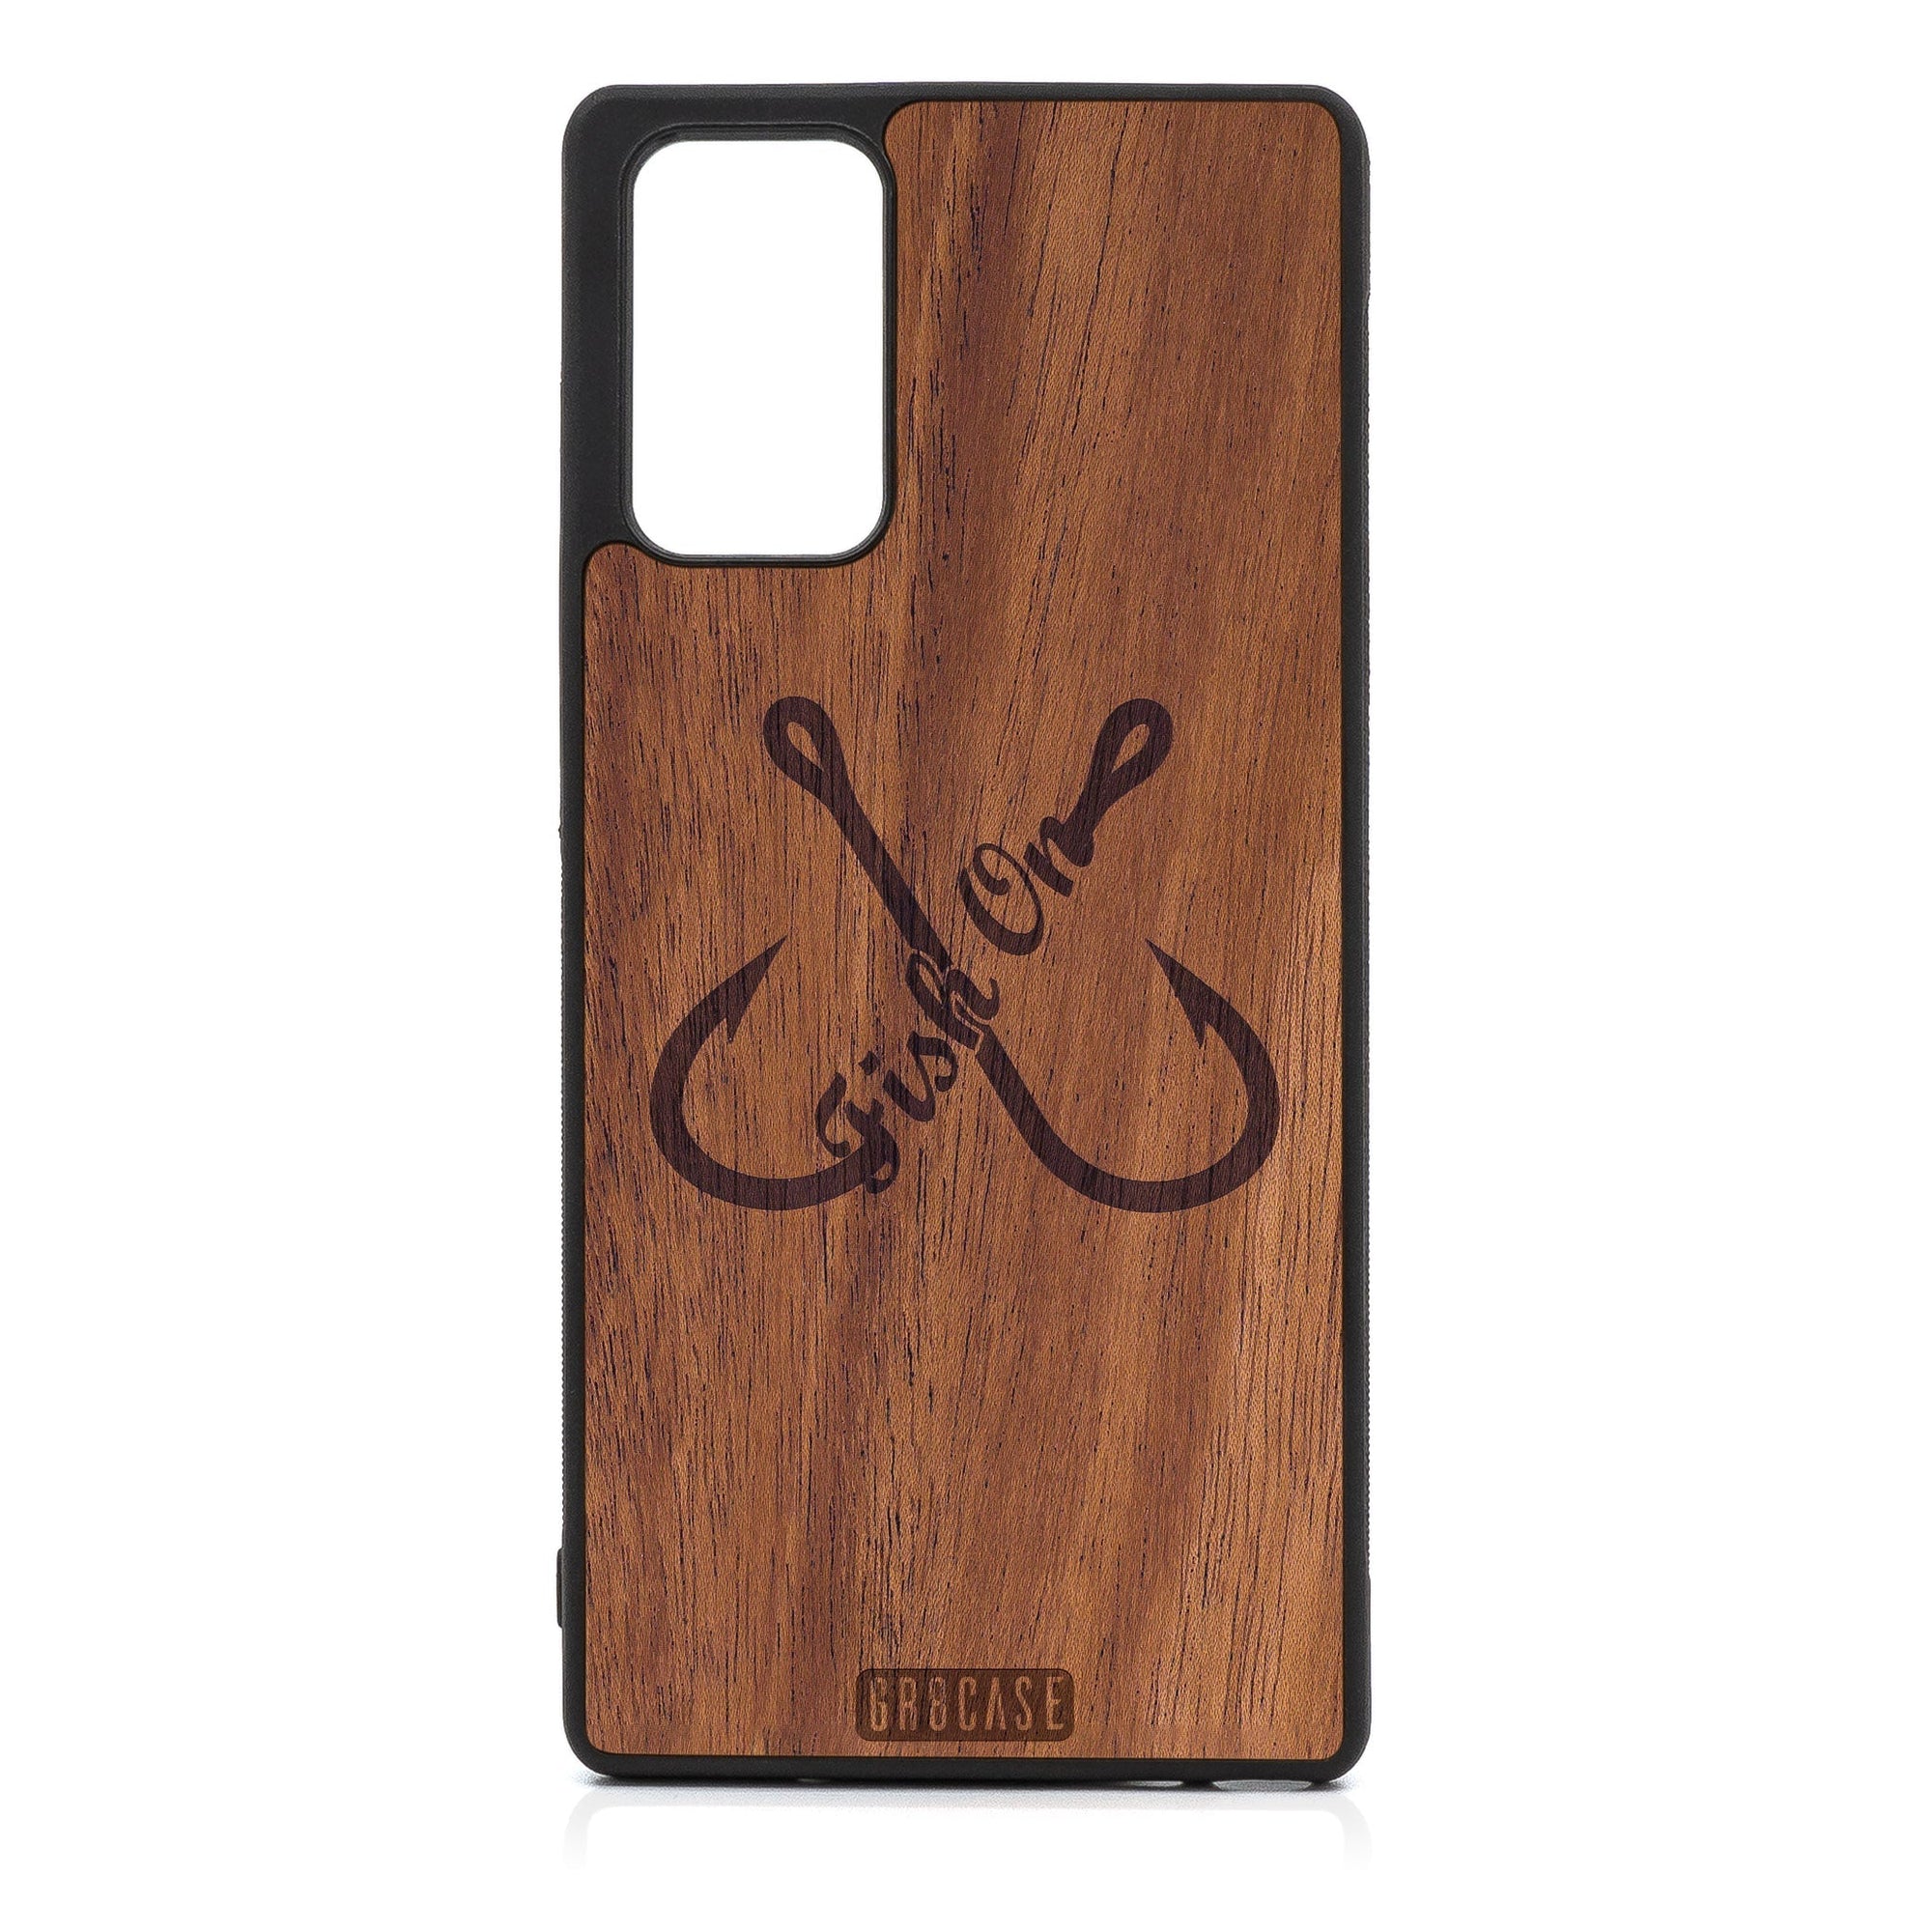 Fish On (Fish Hooks) Design Wood Case For Samsung Galaxy A73 5G